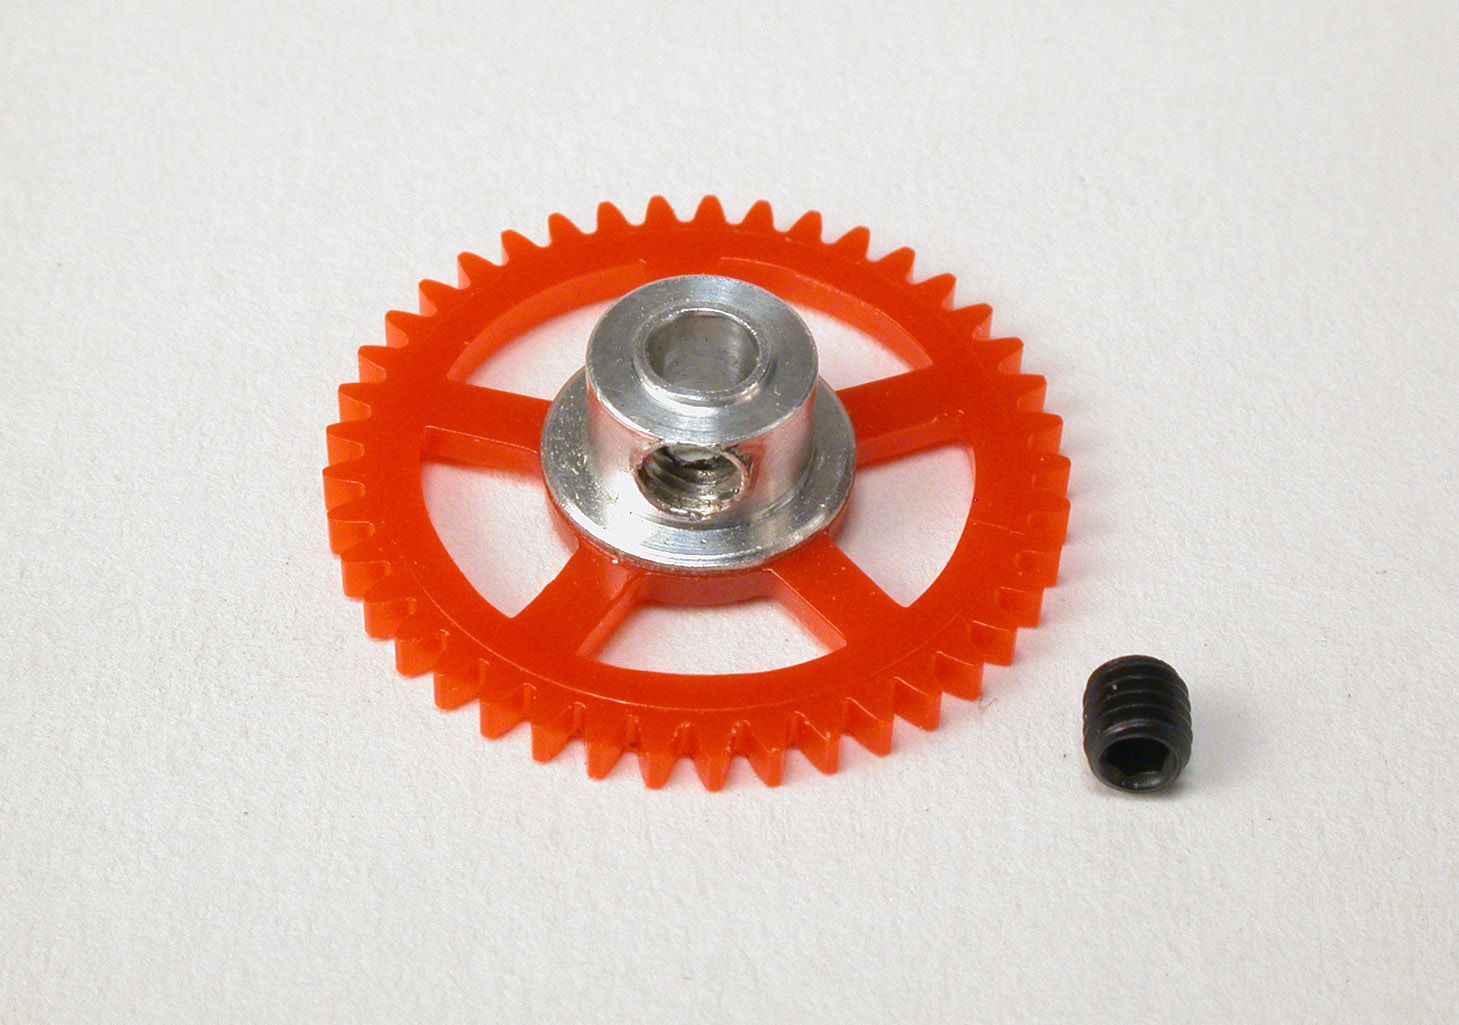 Sidewinder Spur Gears for 3mm. axles / 1/24 Scale Cars